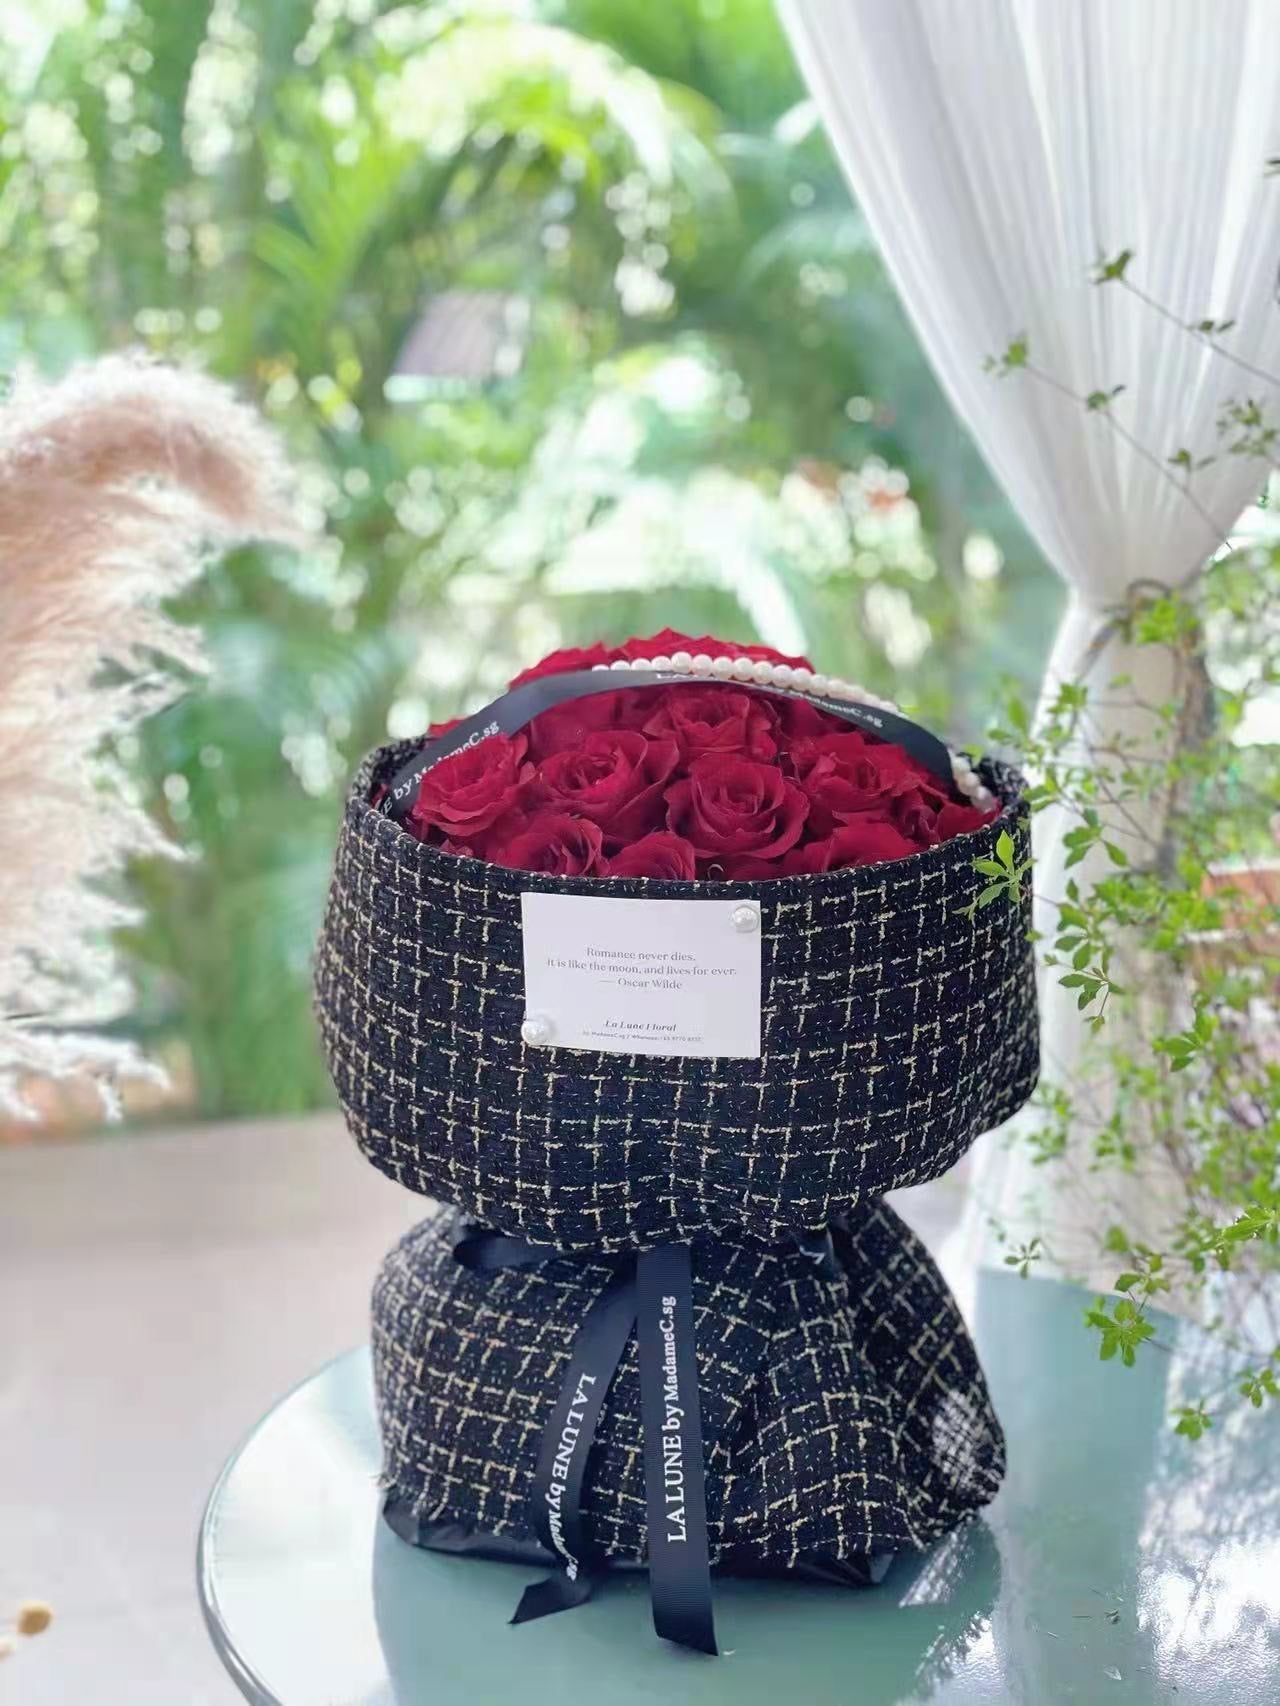 Classic Chanel Style Bouquet(33 stk red roses)